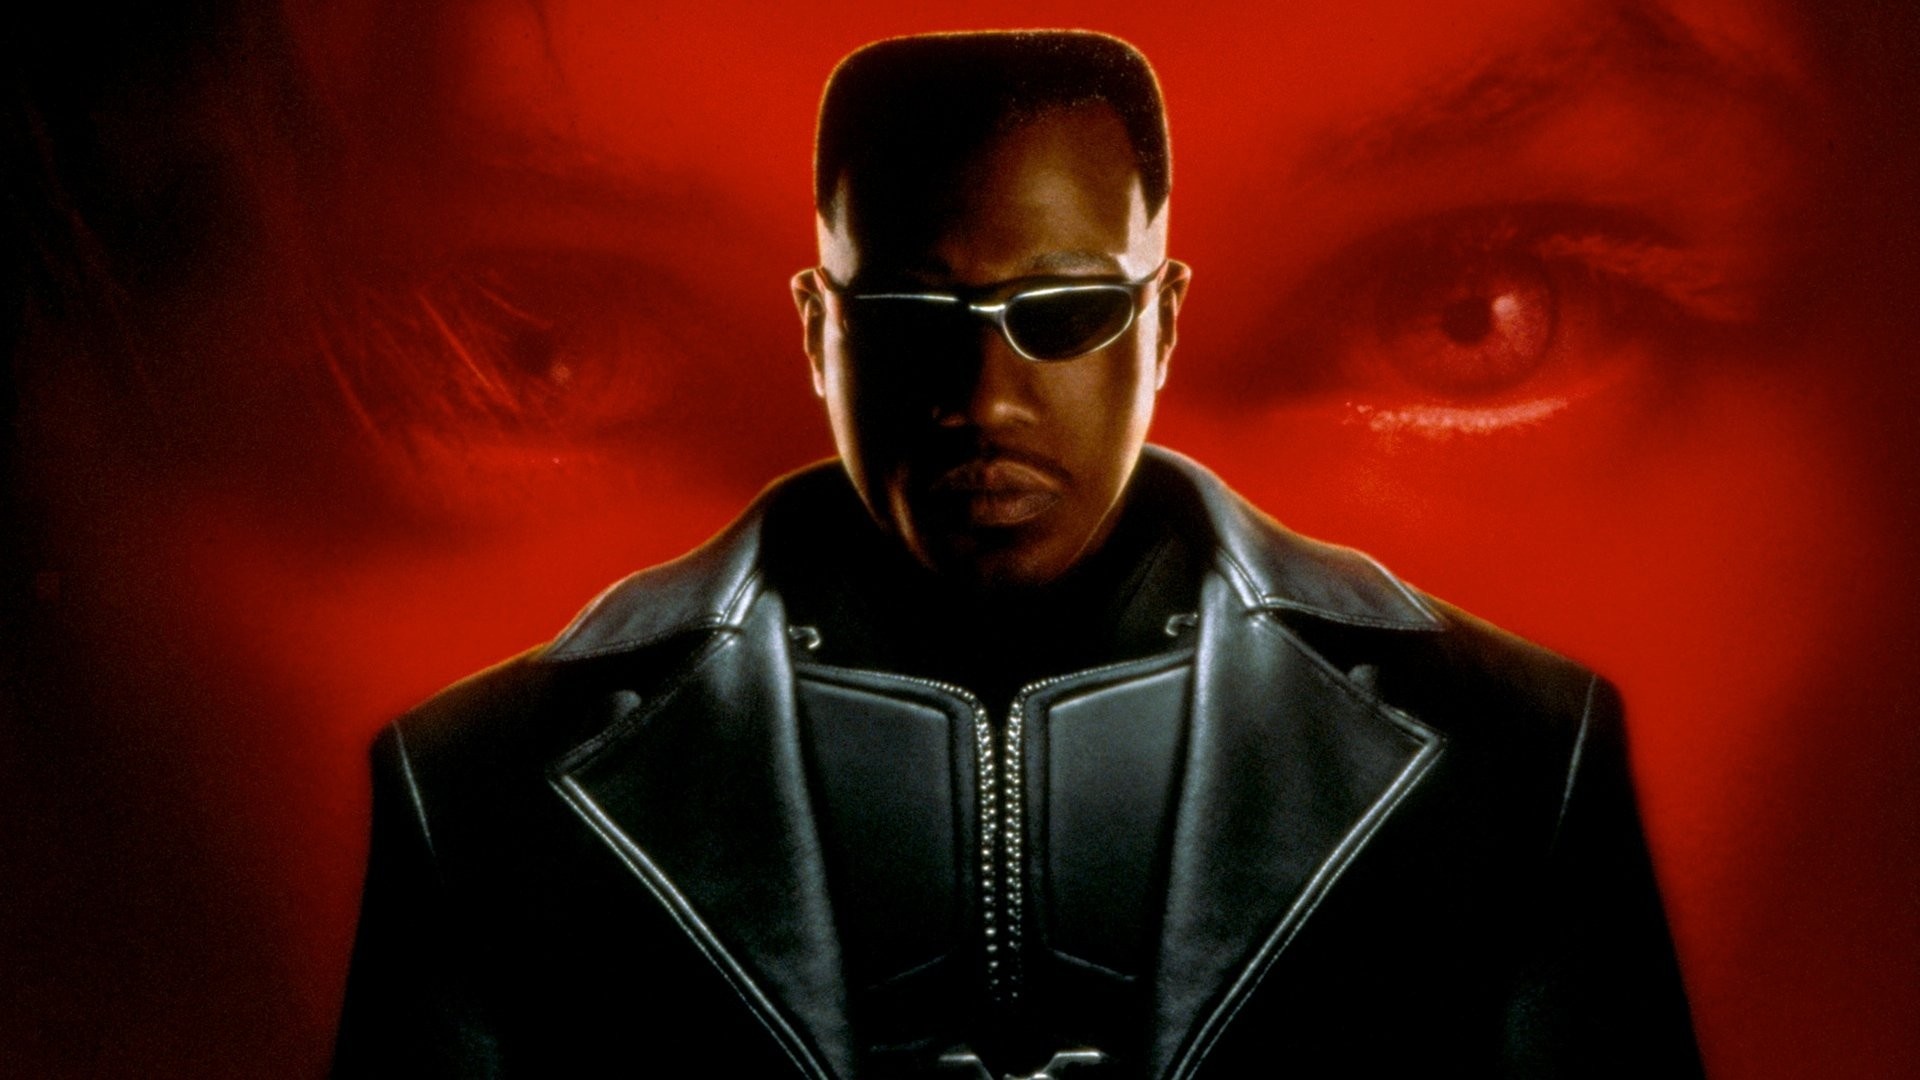 Blade, Comic book character, HQ pictures, 4K wallpapers, 1920x1080 Full HD Desktop